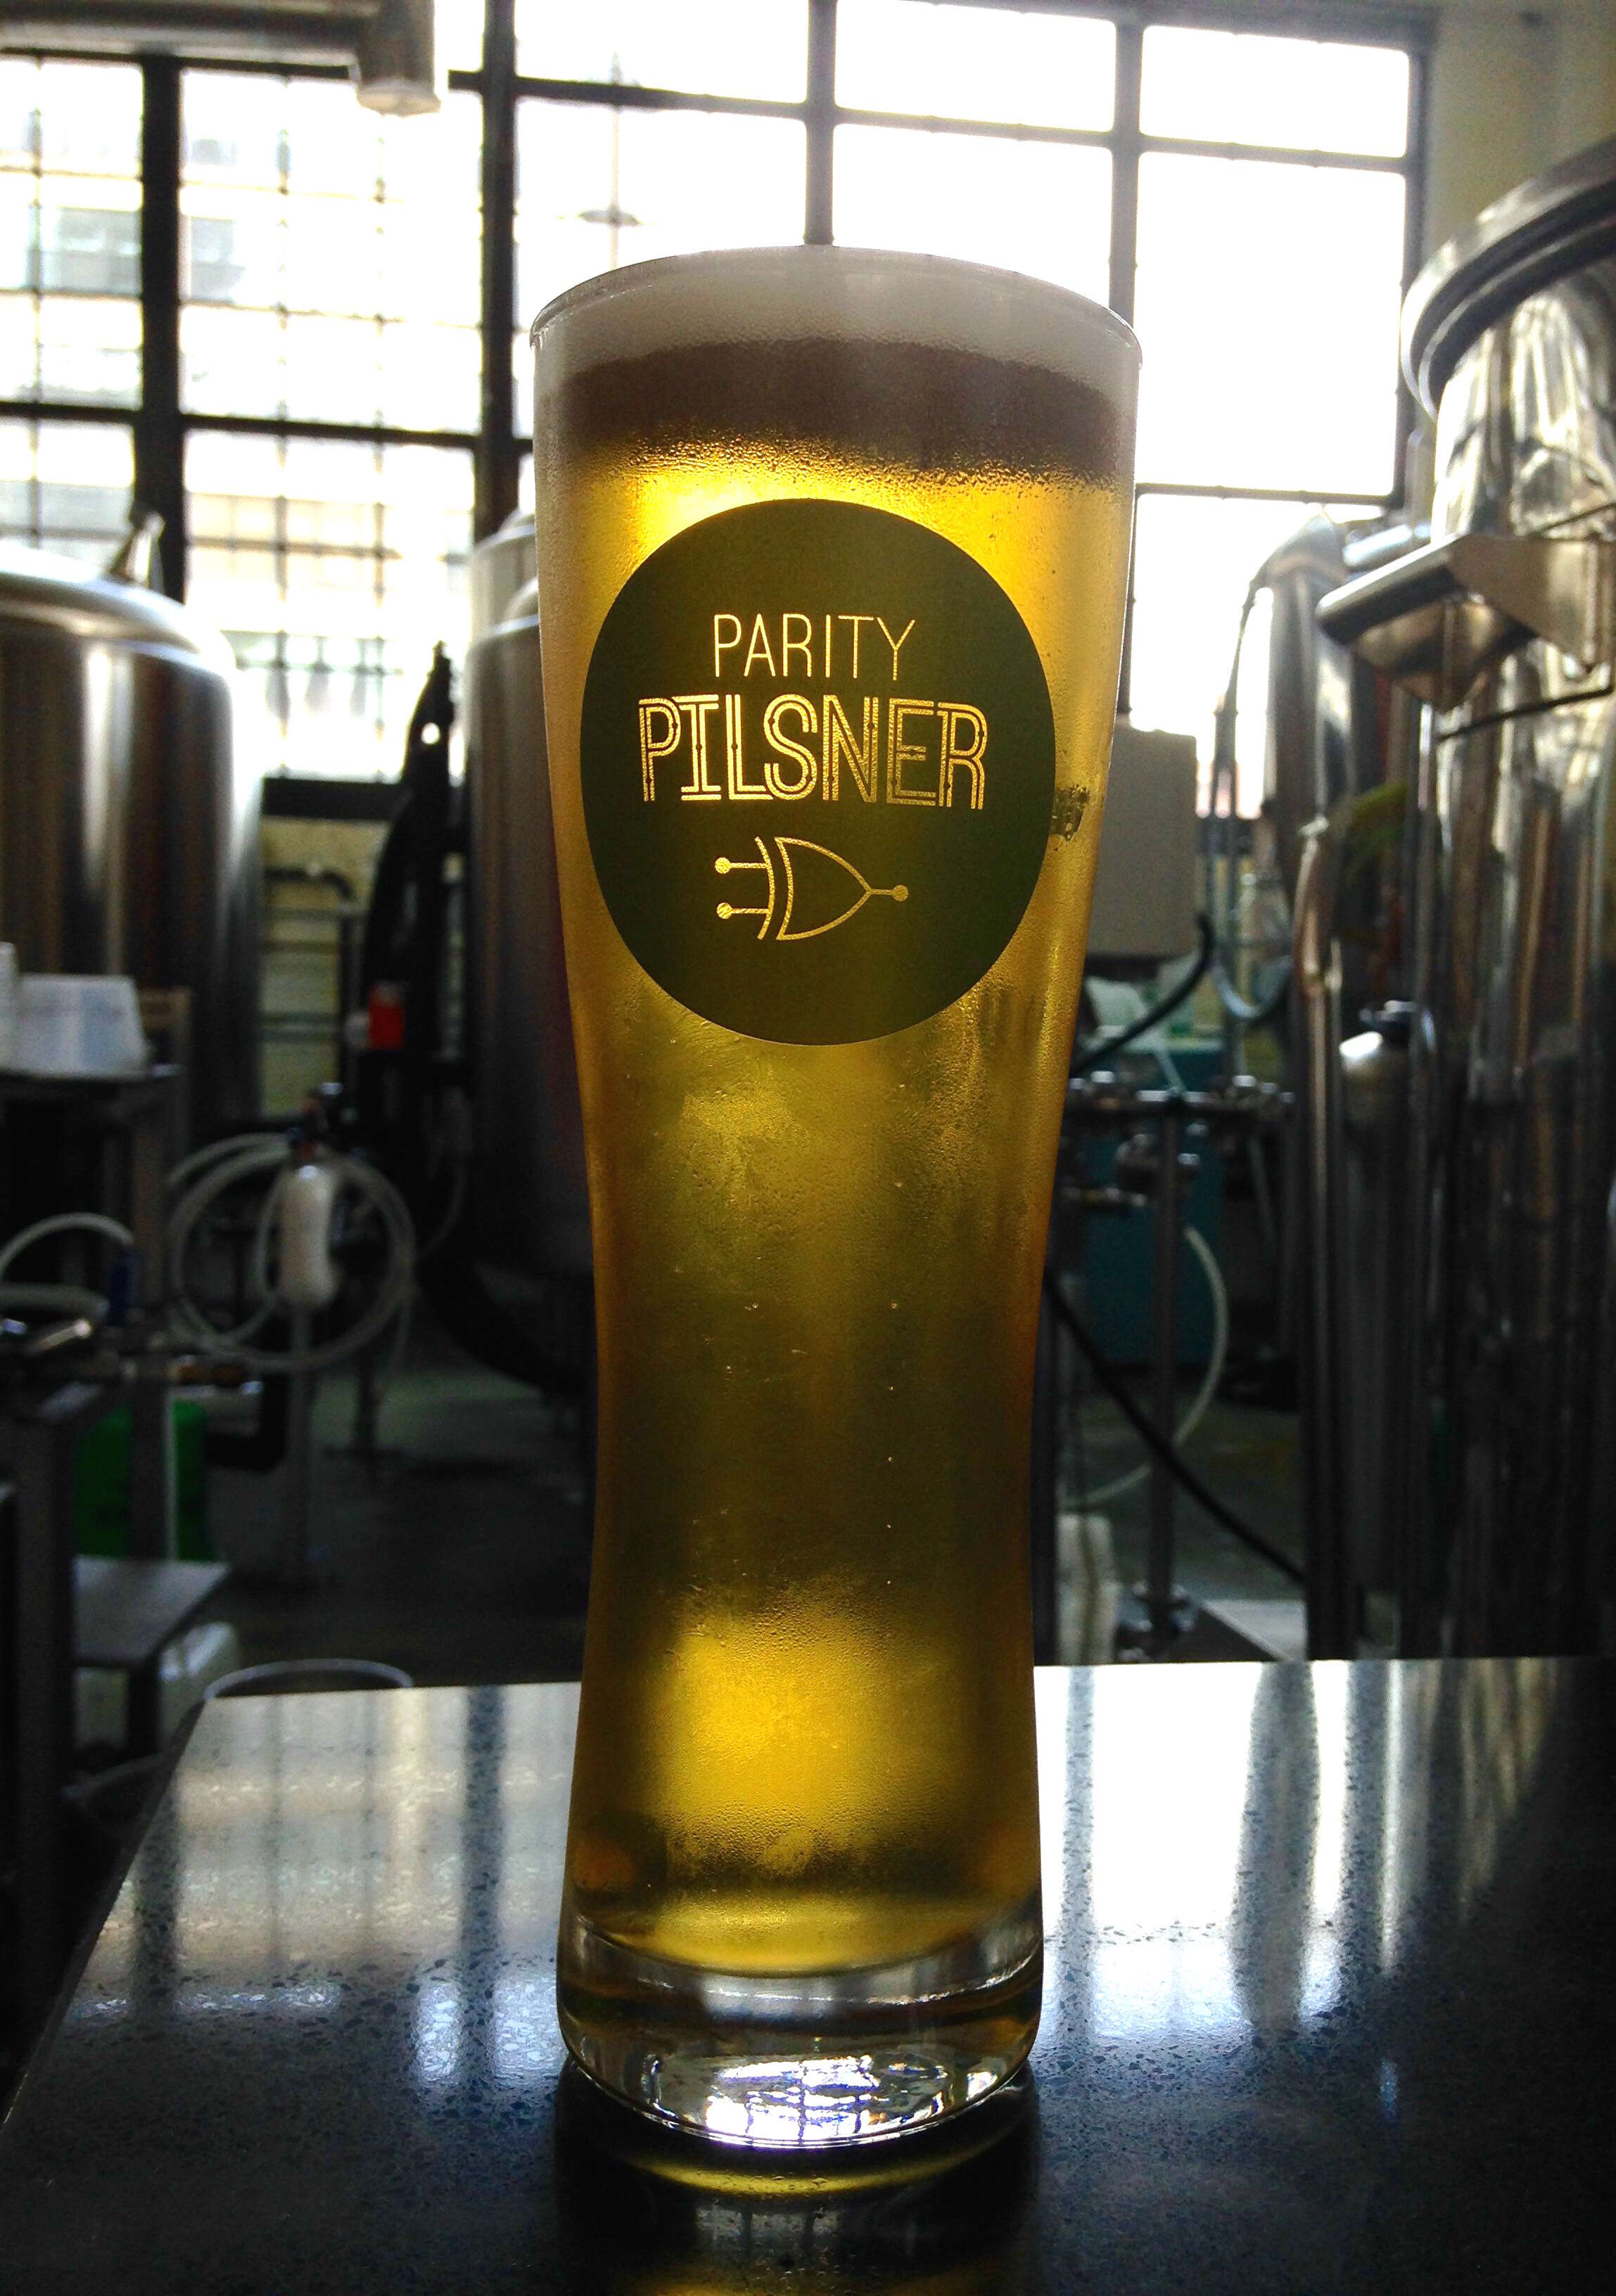 Tin Whiskers Brewing Co., parity pilsner